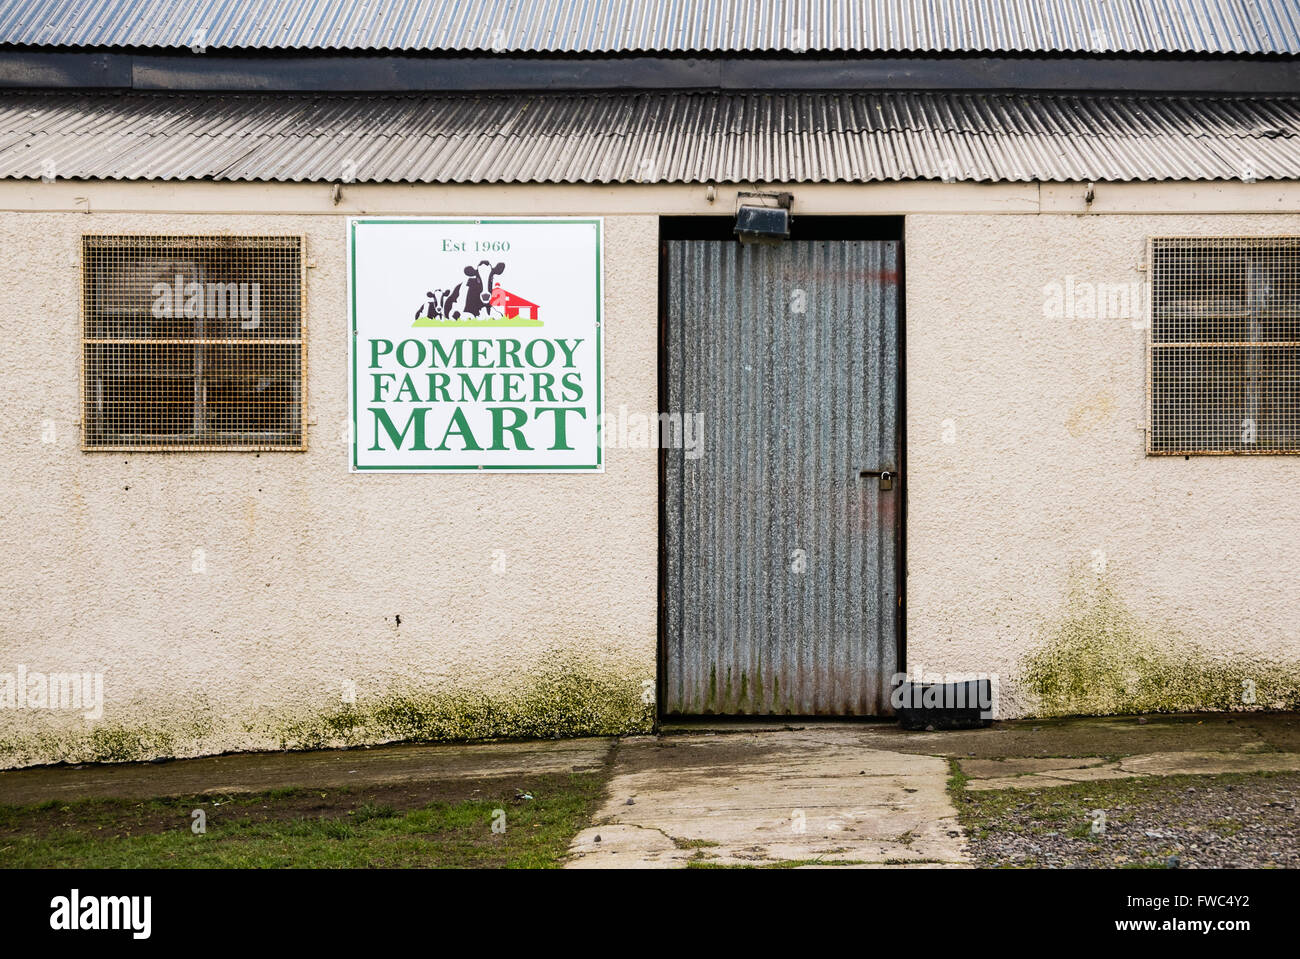 Pomeroy Farmers' Mart building in County Tyrone, Northern Ireland. Stock Photo